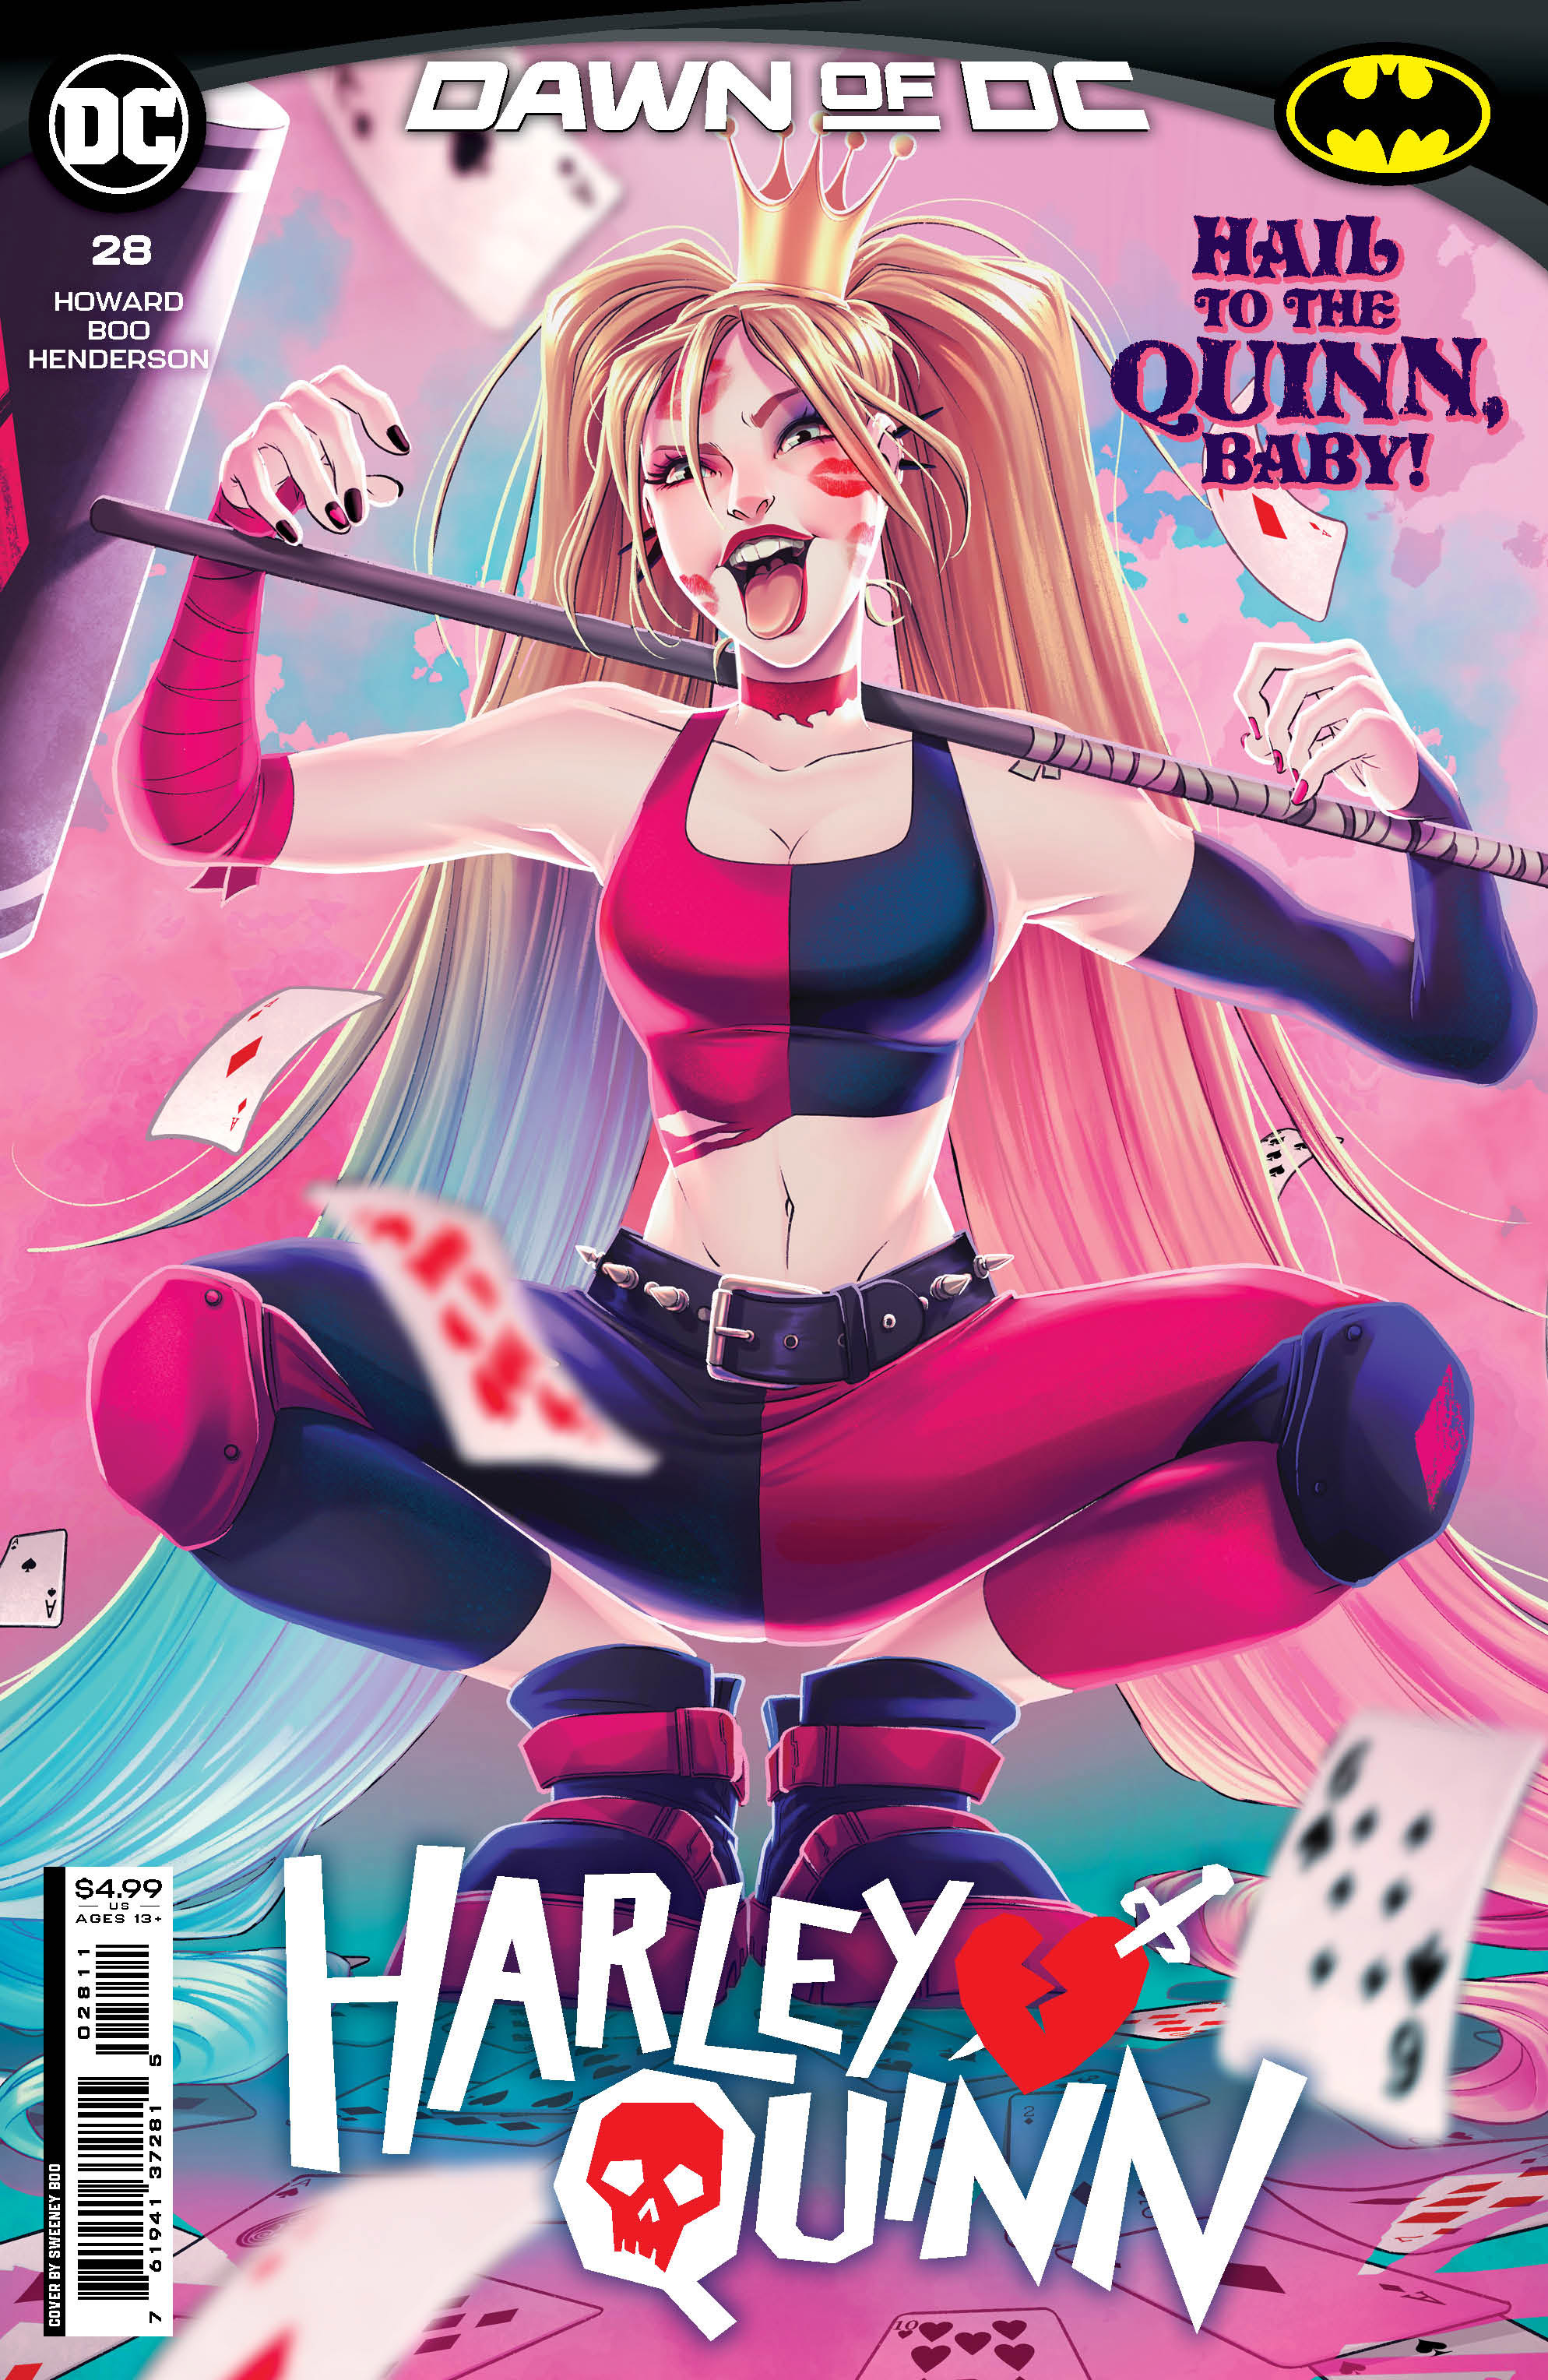 DC: Harley Quinn #28 (Cover A Sweeney Boo) from Harley Quinn by Tini Howard  published by DC Comics UK and Worldwide Cult  Entertainment Megastore